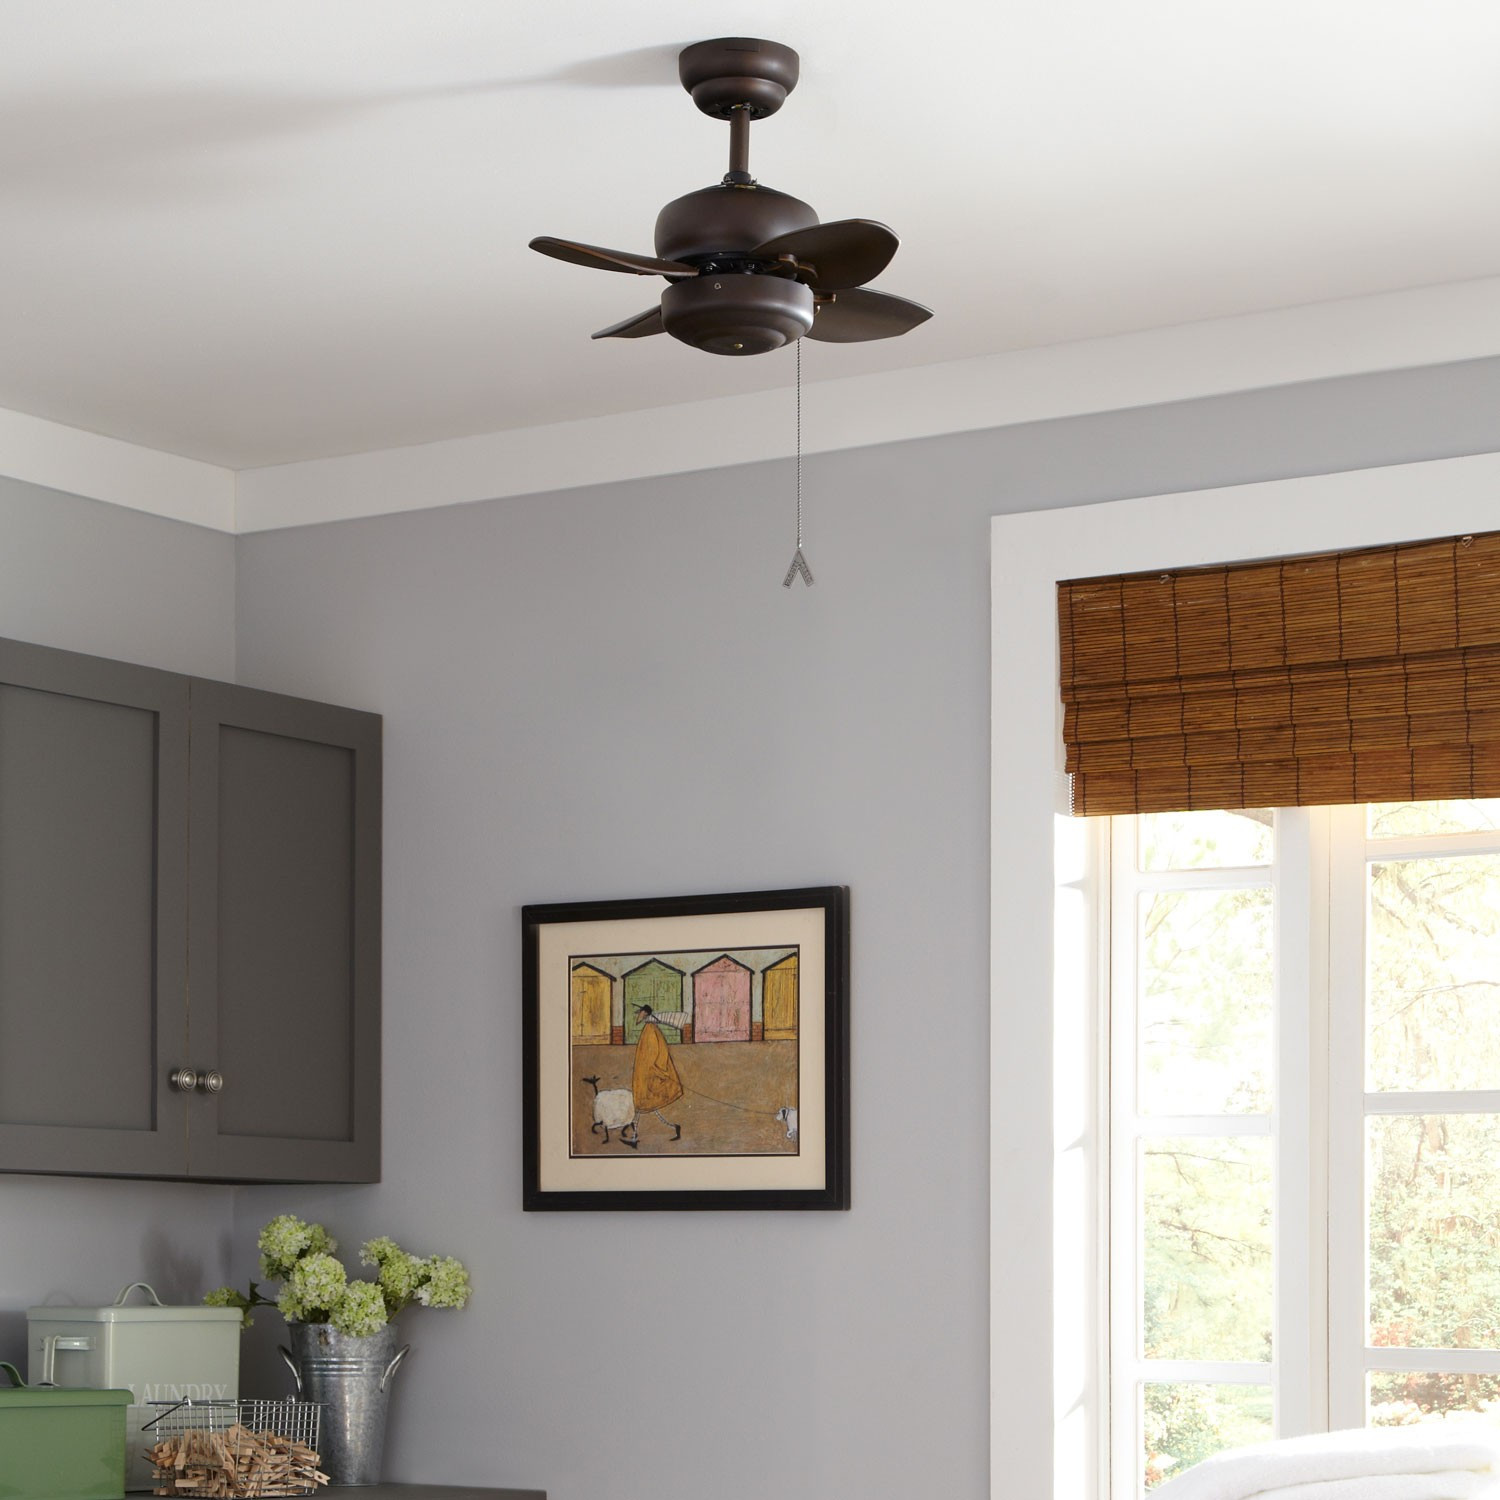 Small Bedroom Ceiling Fan
 How to Choose the Best Fan Size for You